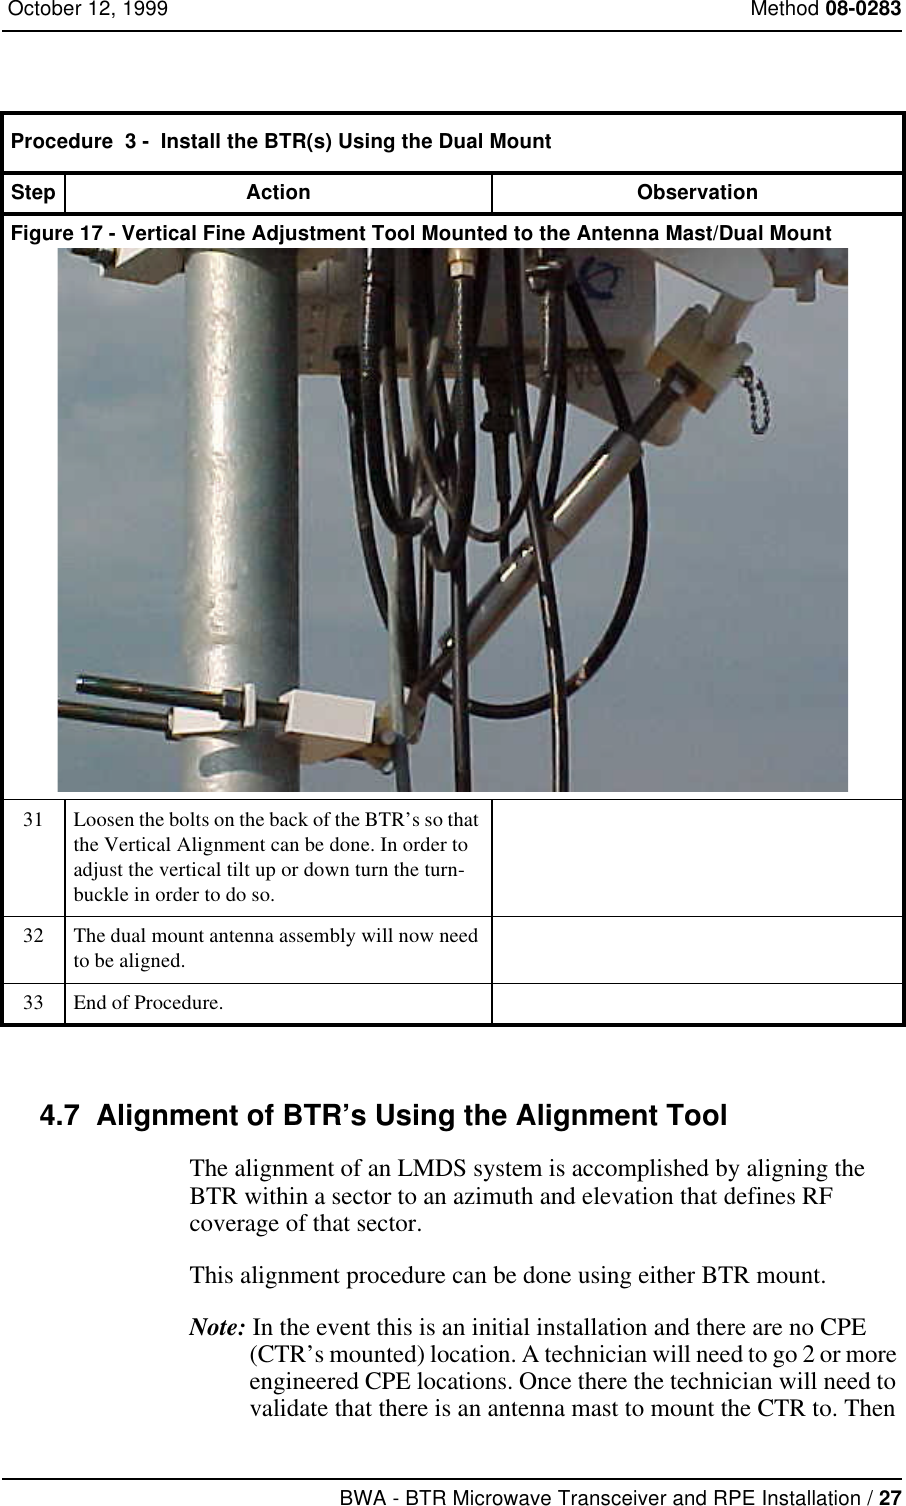 BWA - BTR Microwave Transceiver and RPE Installation / 27 October 12, 1999 Method 08-02834.7  Alignment of BTR’s Using the Alignment ToolThe alignment of an LMDS system is accomplished by aligning the BTR within a sector to an azimuth and elevation that defines RF coverage of that sector.This alignment procedure can be done using either BTR mount.Note: In the event this is an initial installation and there are no CPE (CTR’s mounted) location. A technician will need to go 2 or more engineered CPE locations. Once there the technician will need to validate that there is an antenna mast to mount the CTR to. Then Figure 17 - Vertical Fine Adjustment Tool Mounted to the Antenna Mast/Dual Mount31 Loosen the bolts on the back of the BTR’s so that the Vertical Alignment can be done. In order to adjust the vertical tilt up or down turn the turn-buckle in order to do so.32 The dual mount antenna assembly will now need to be aligned.33 End of Procedure.Procedure  3 -  Install the BTR(s) Using the Dual MountStep Action Observation